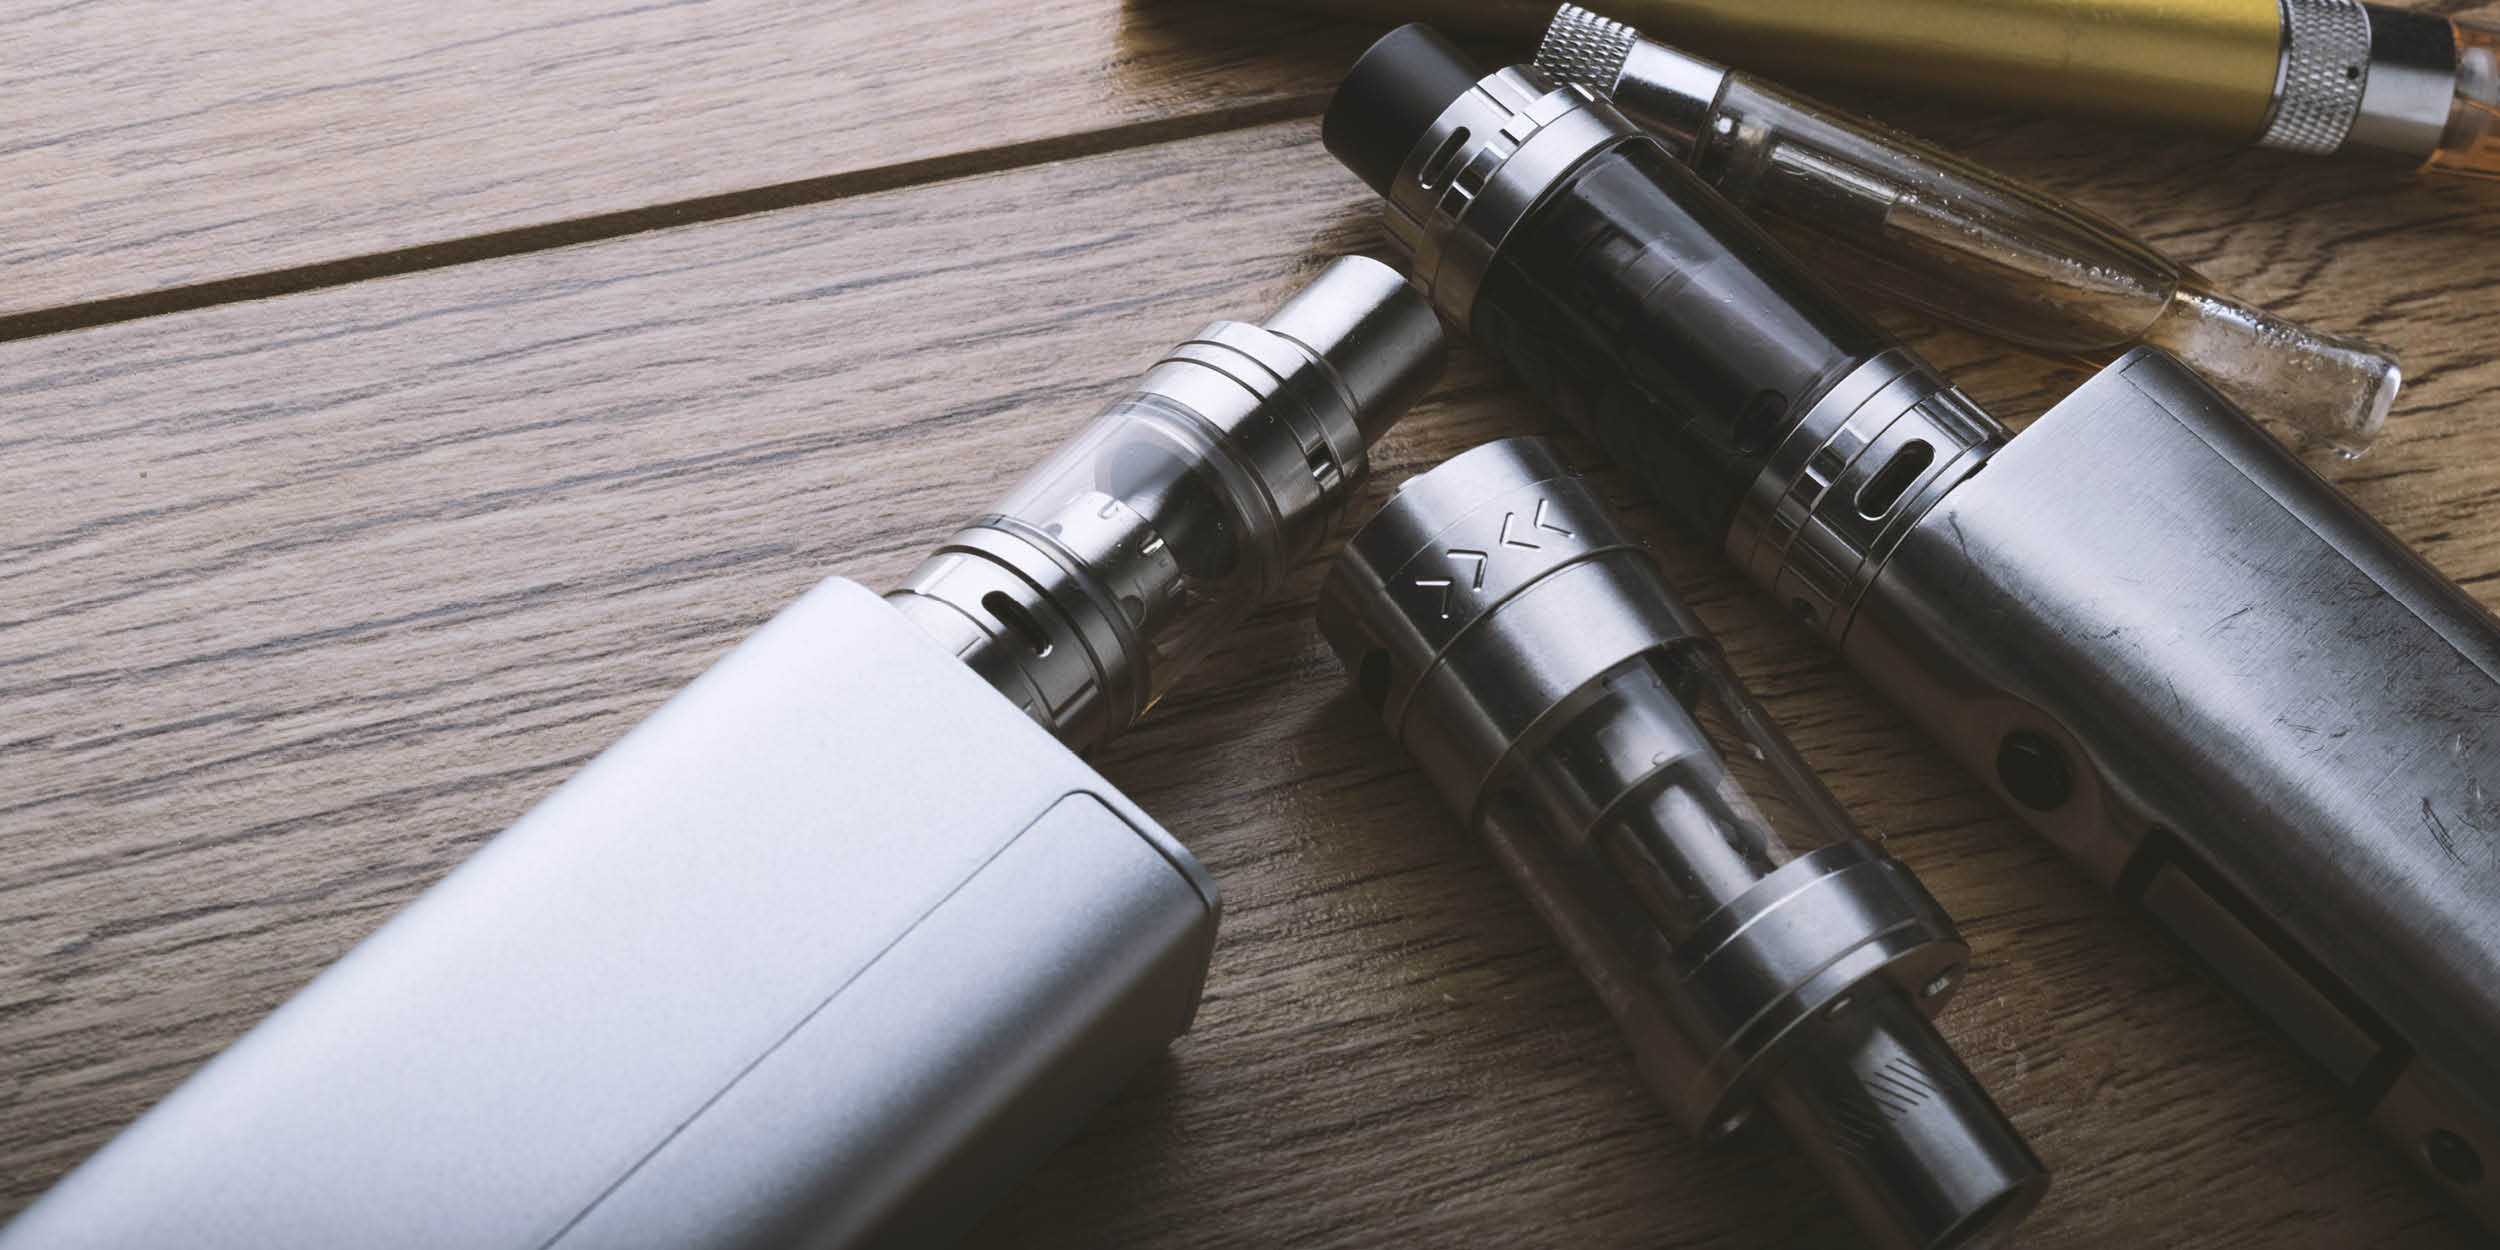 Vaping-Related Pneumonia ‘Lipoid’ Discovered